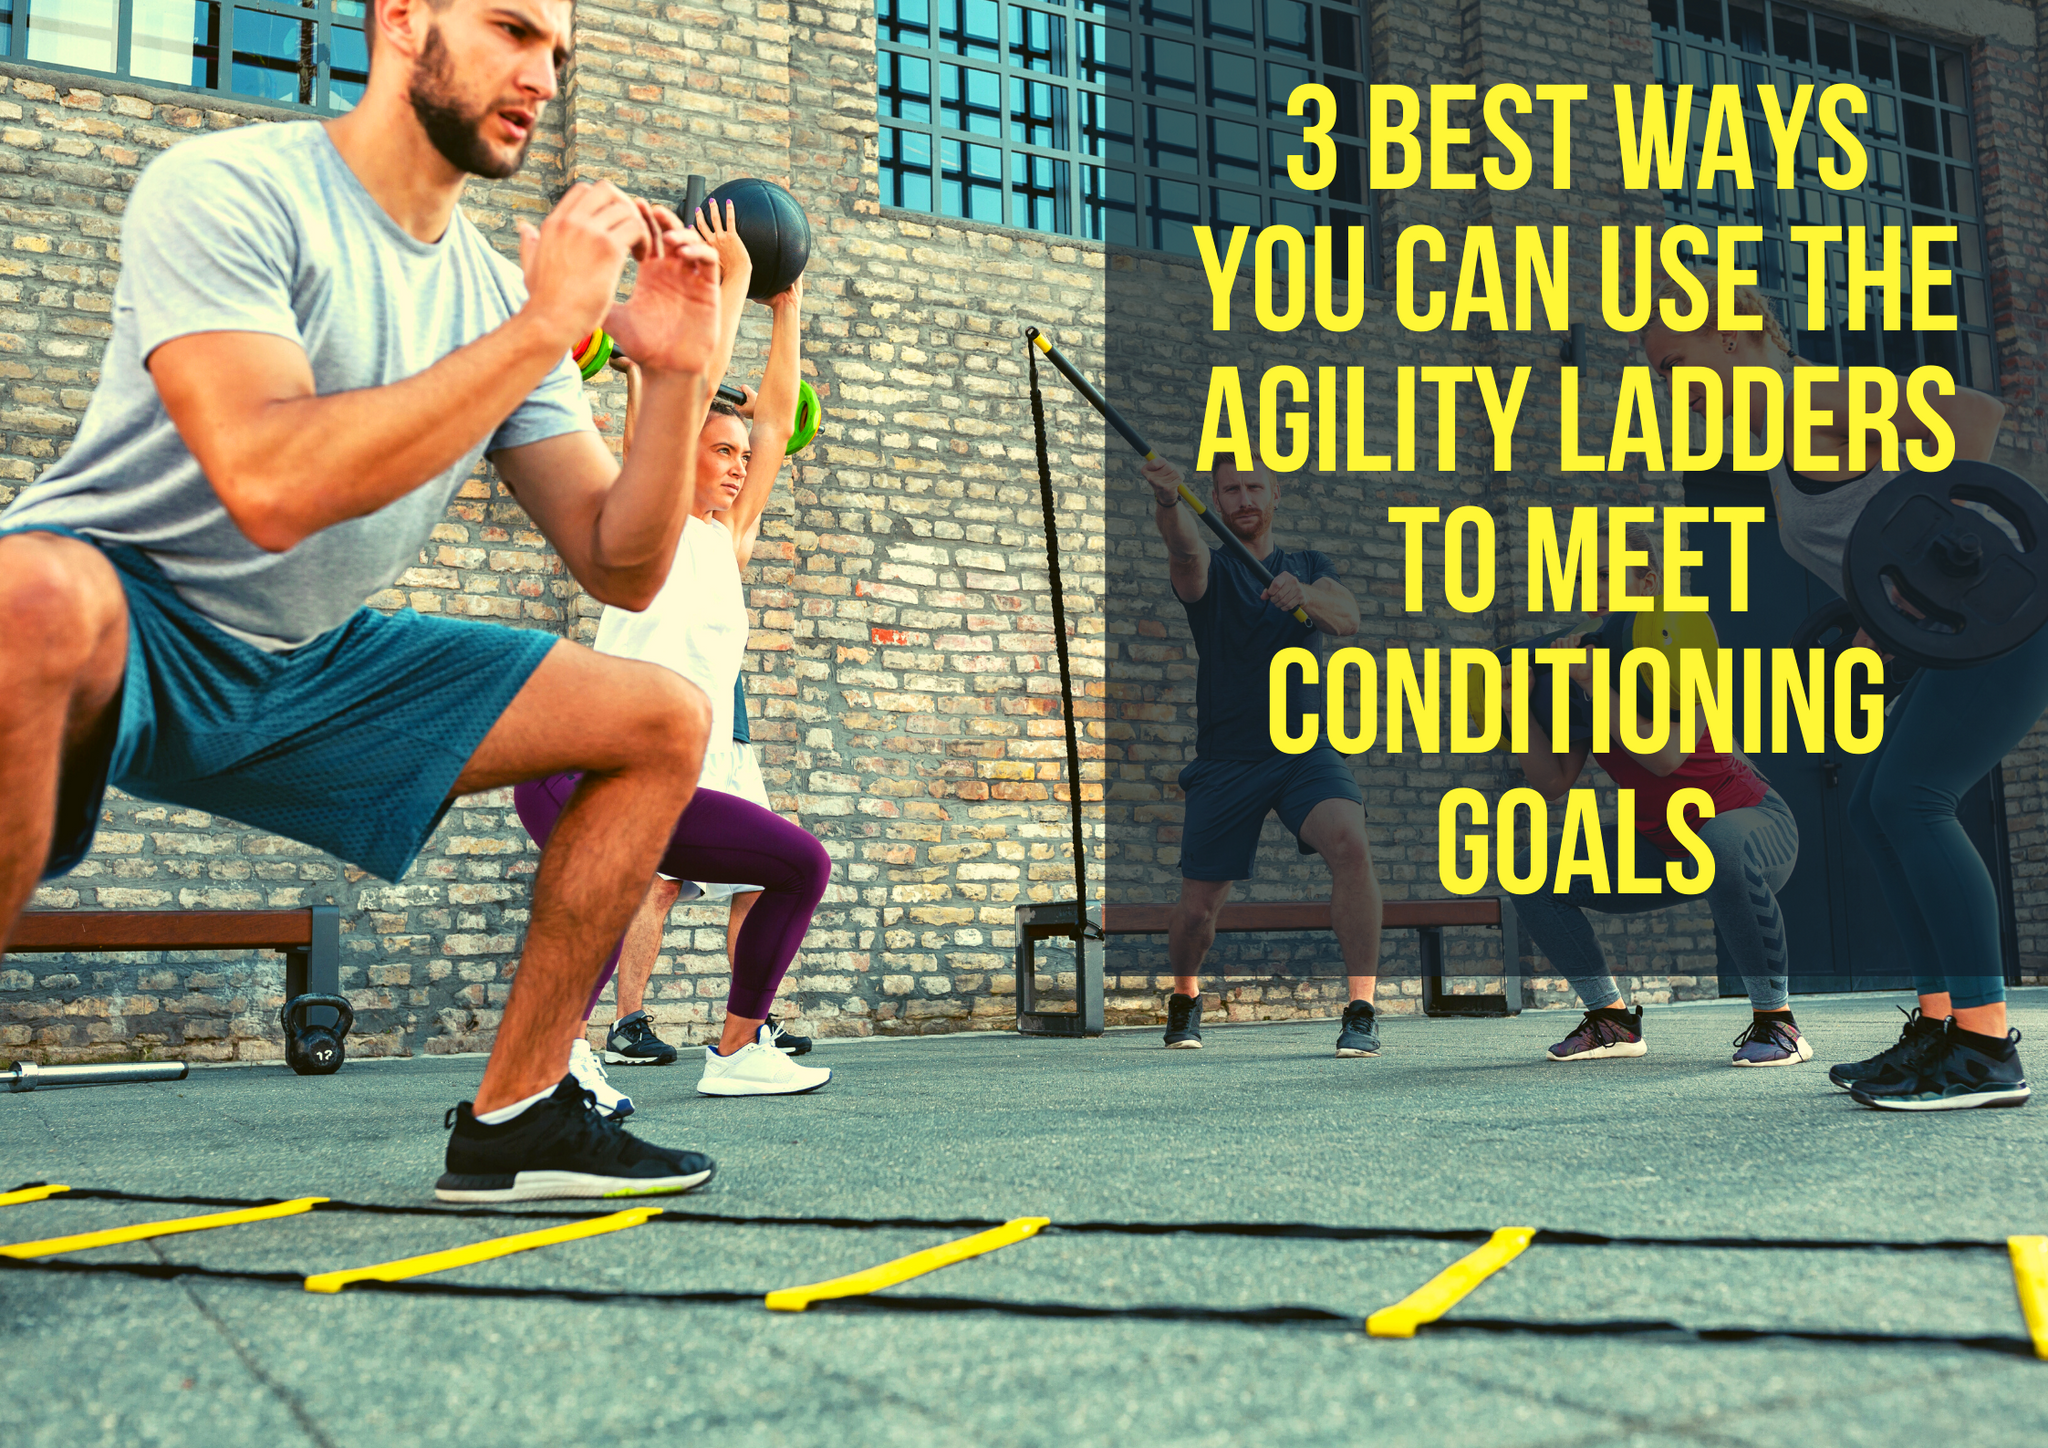 3 Best Ways You Can Use the Agility Ladder To Meet Conditioning Goals